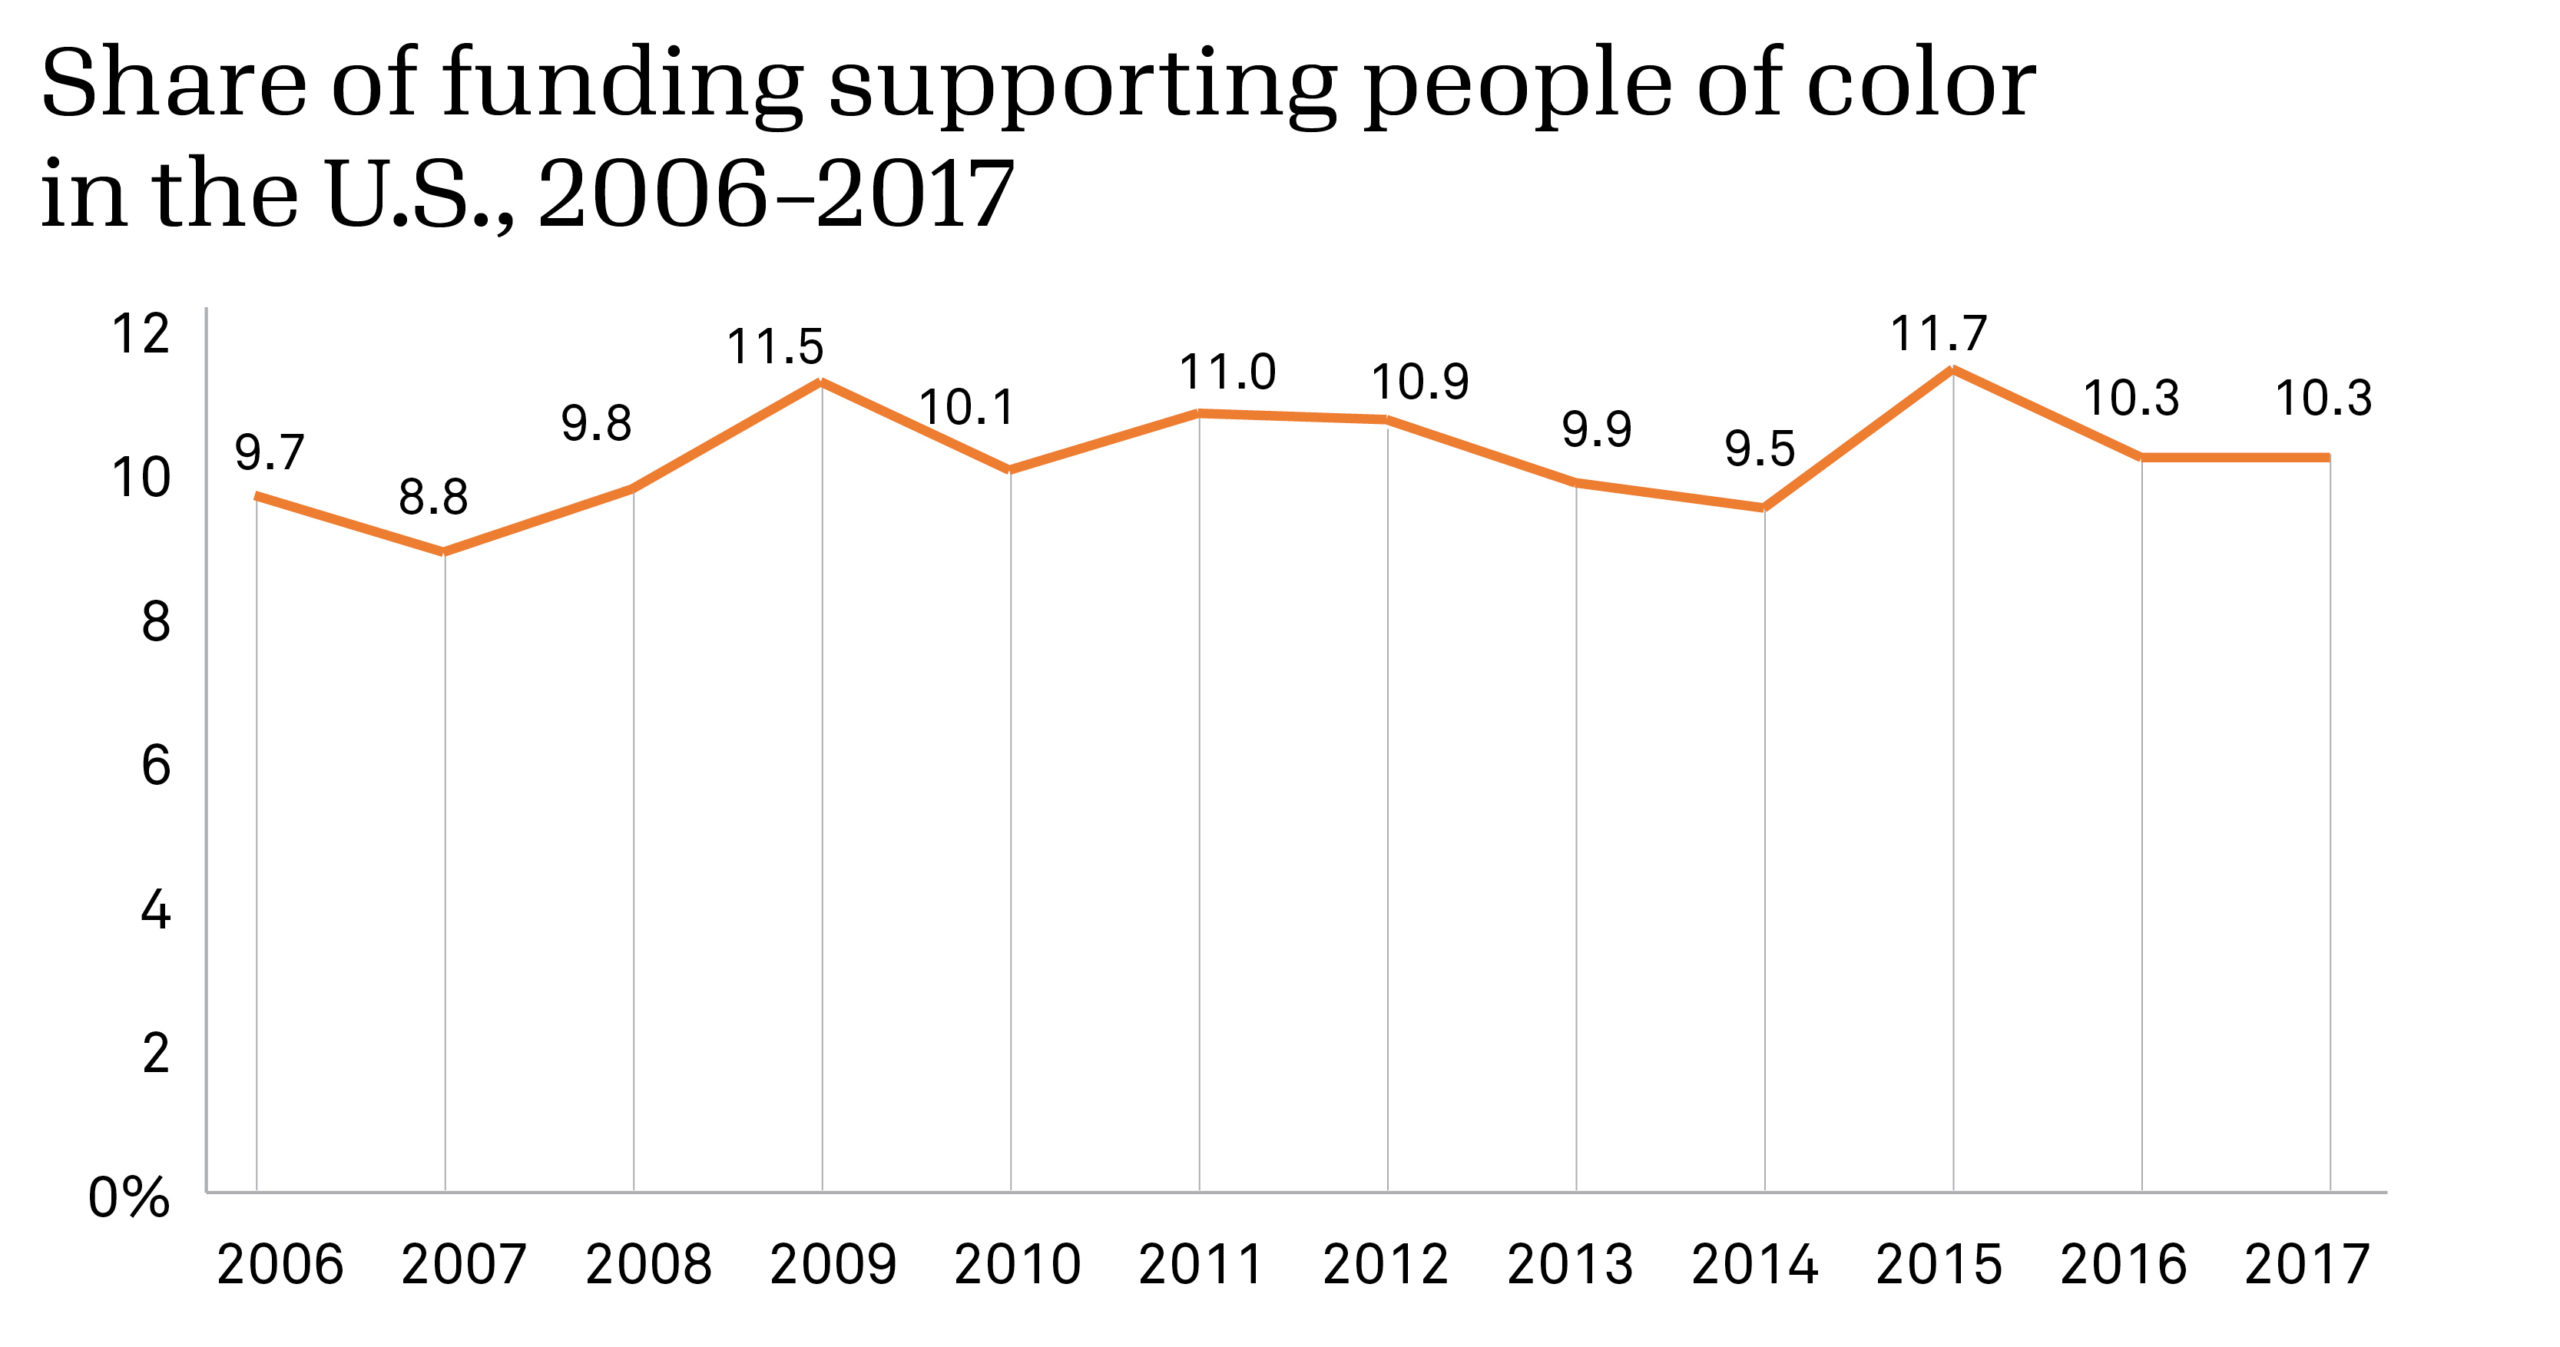 Share of funding supporting people of color in the U.S., 2006-2017